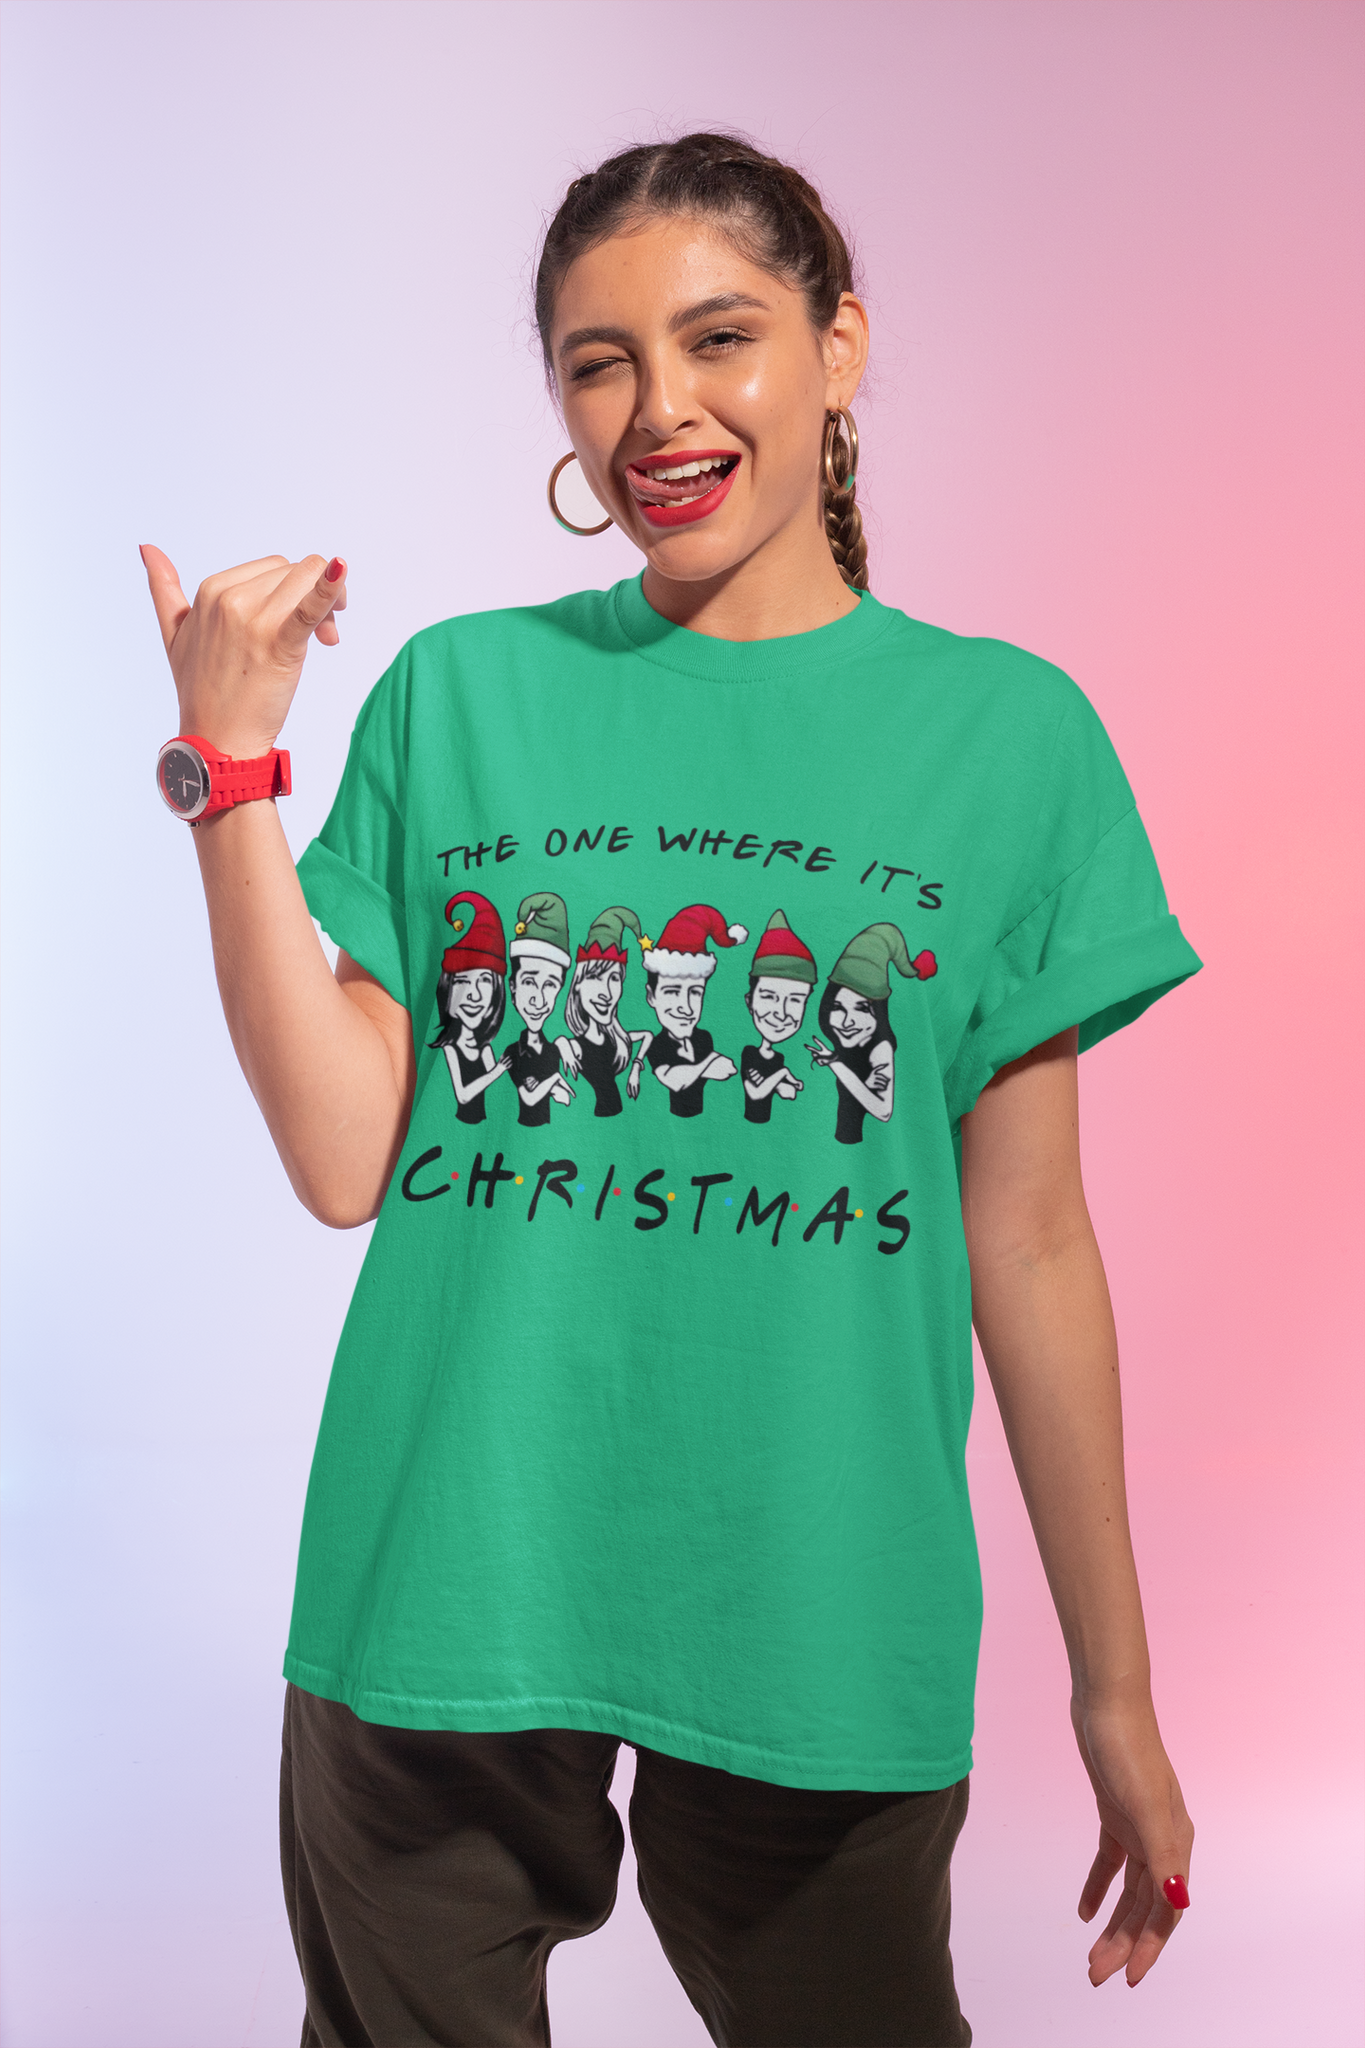 Friends TV Show T Shirt, Friends Shirt, Friends Characters T Shirt, The One Where Its Christmas Tshirt, Christmas Gifts